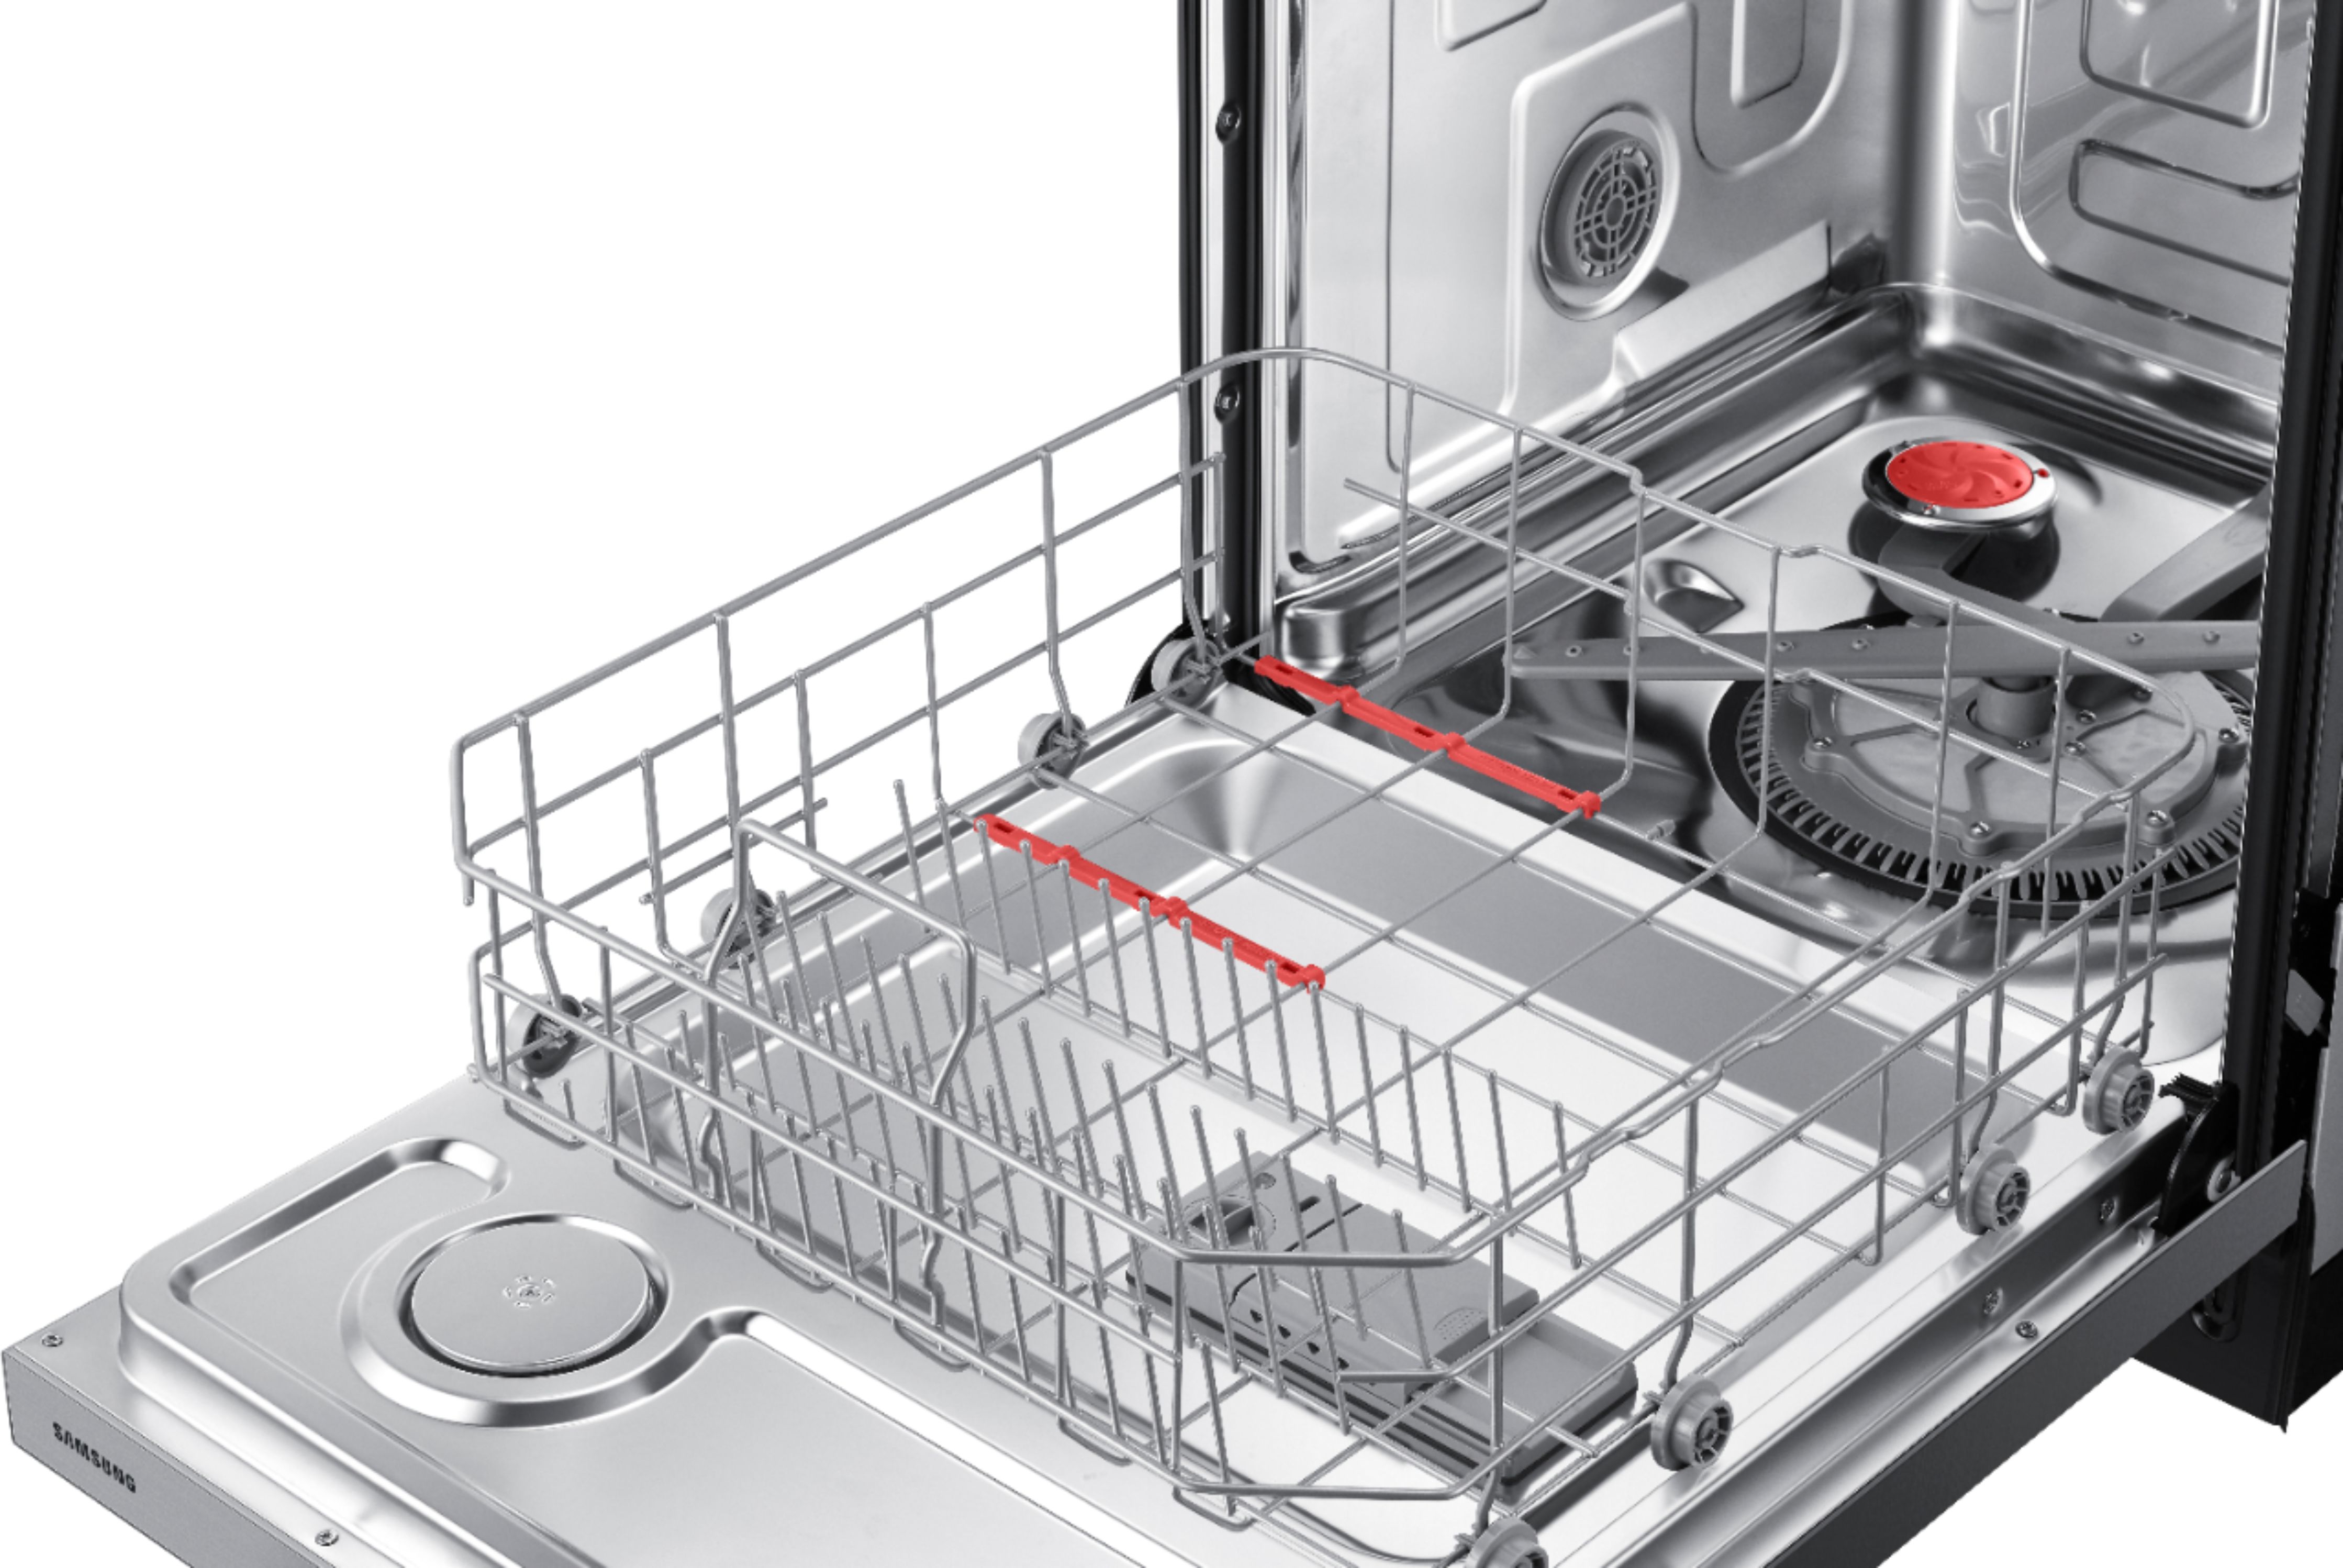 Samsung DW50T6060US 18 Inch Stainless Steel Built-In Fully Integrated  Dishwasher